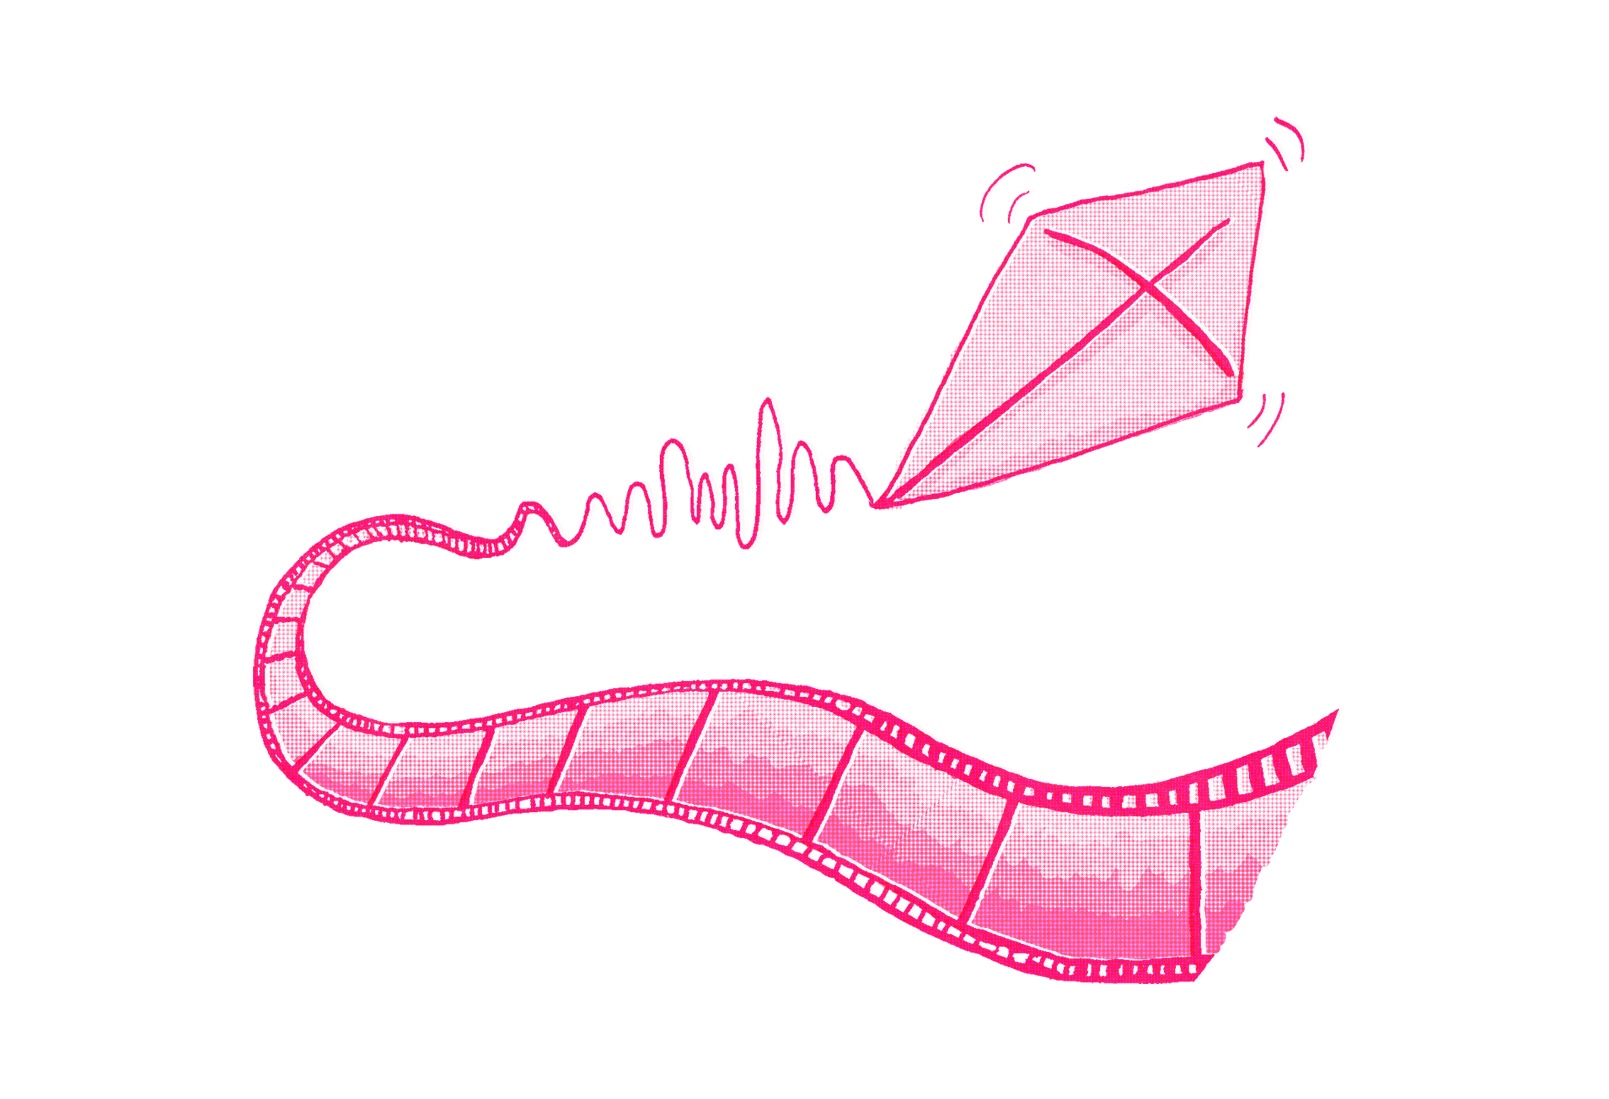 Illustration of a pink kite flying with a tail resembling a film strip. The kite's string is depicted with wavy lines, indicating movement or a signal transmission.